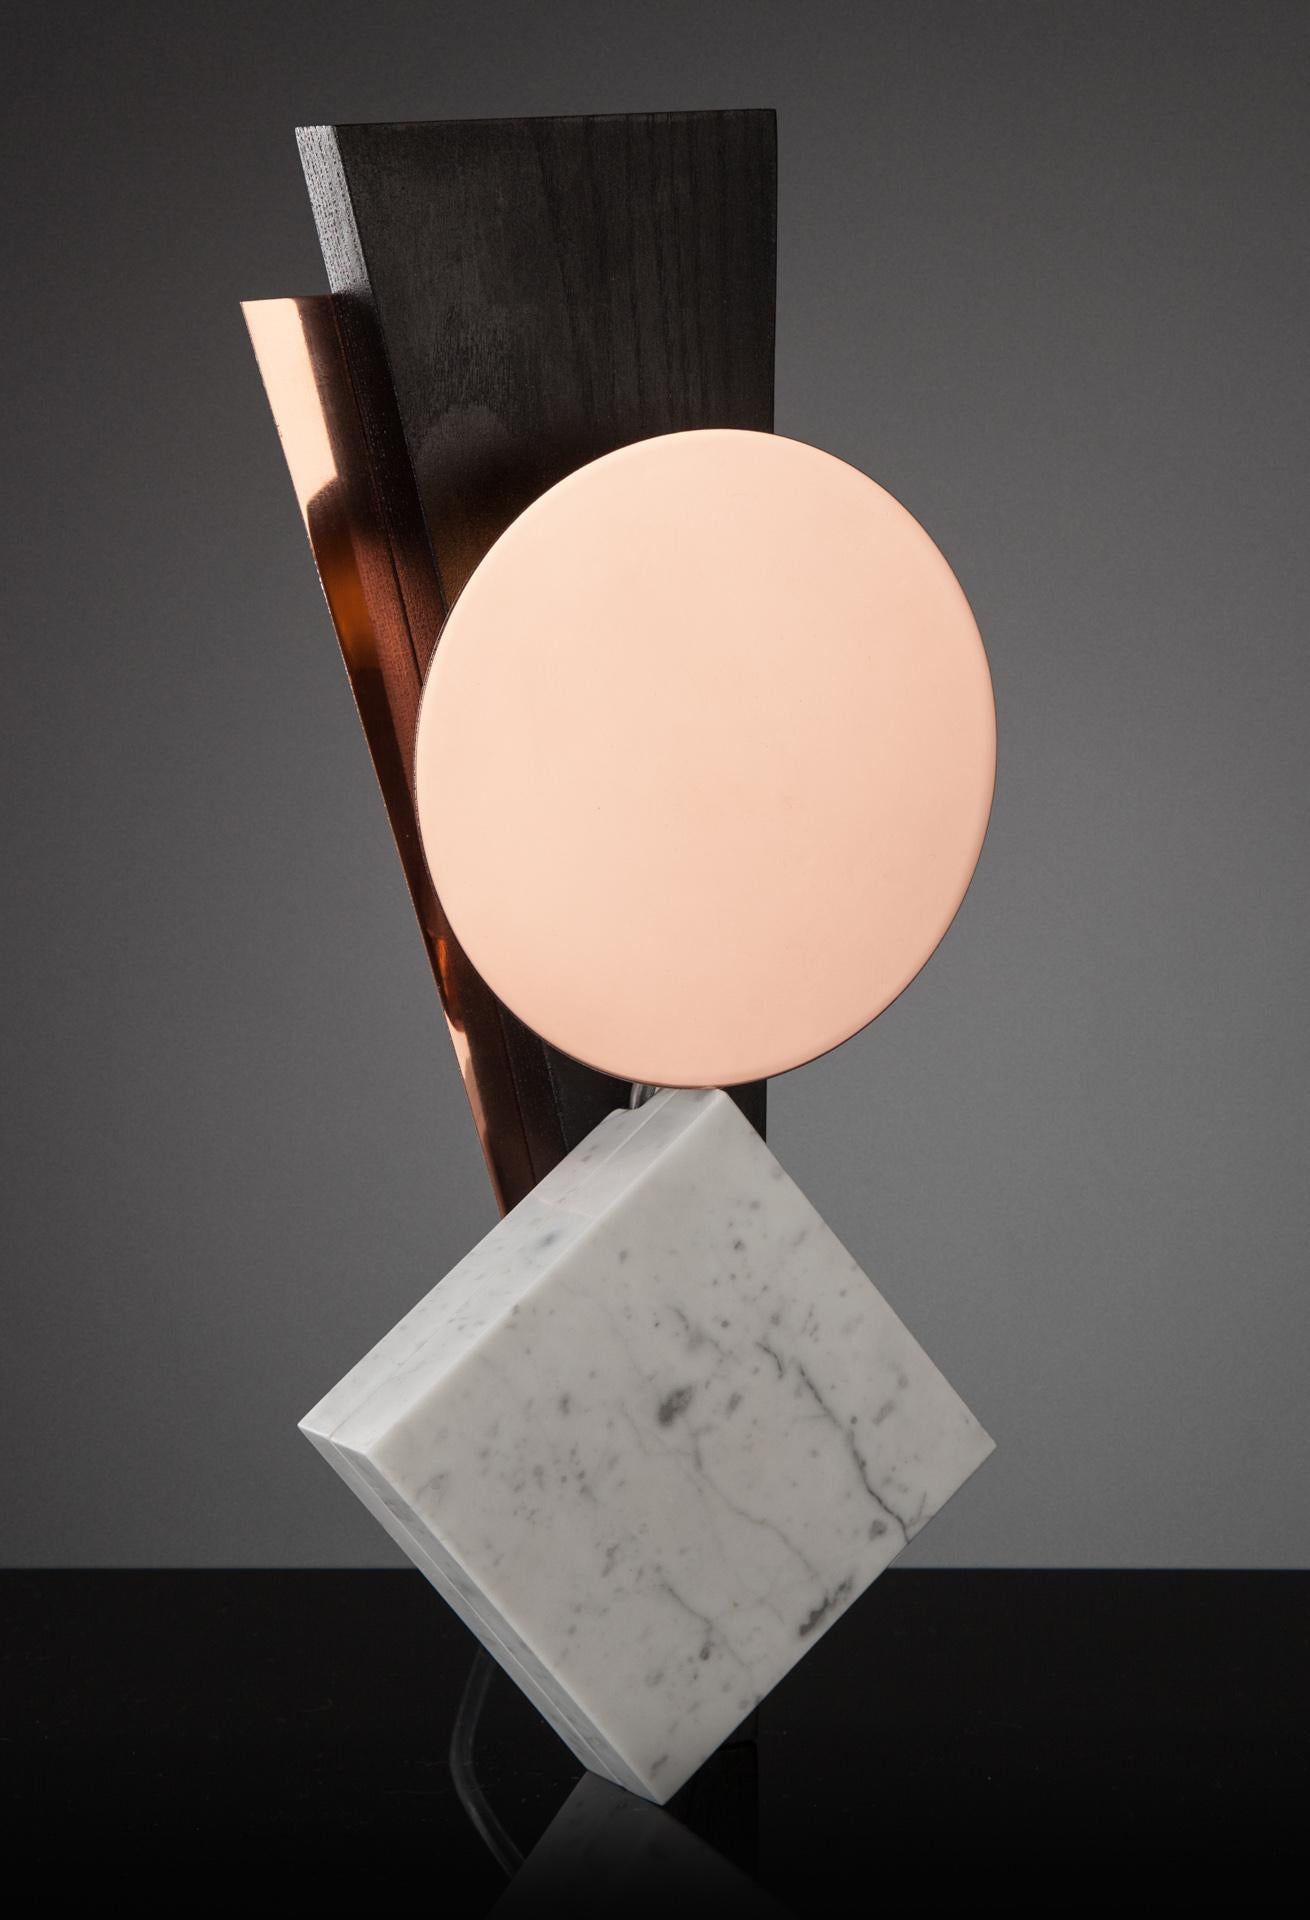 Hand-sculpted marble table lamp– Poise.
Materials: Copper sprayed polished stainless steel, marble, ash.
Dimensions: 36 x 17 x 4 cm
Light: G9 LED bulb.


Skeld design is a contemporary design studio.
We focus on interior lighting and